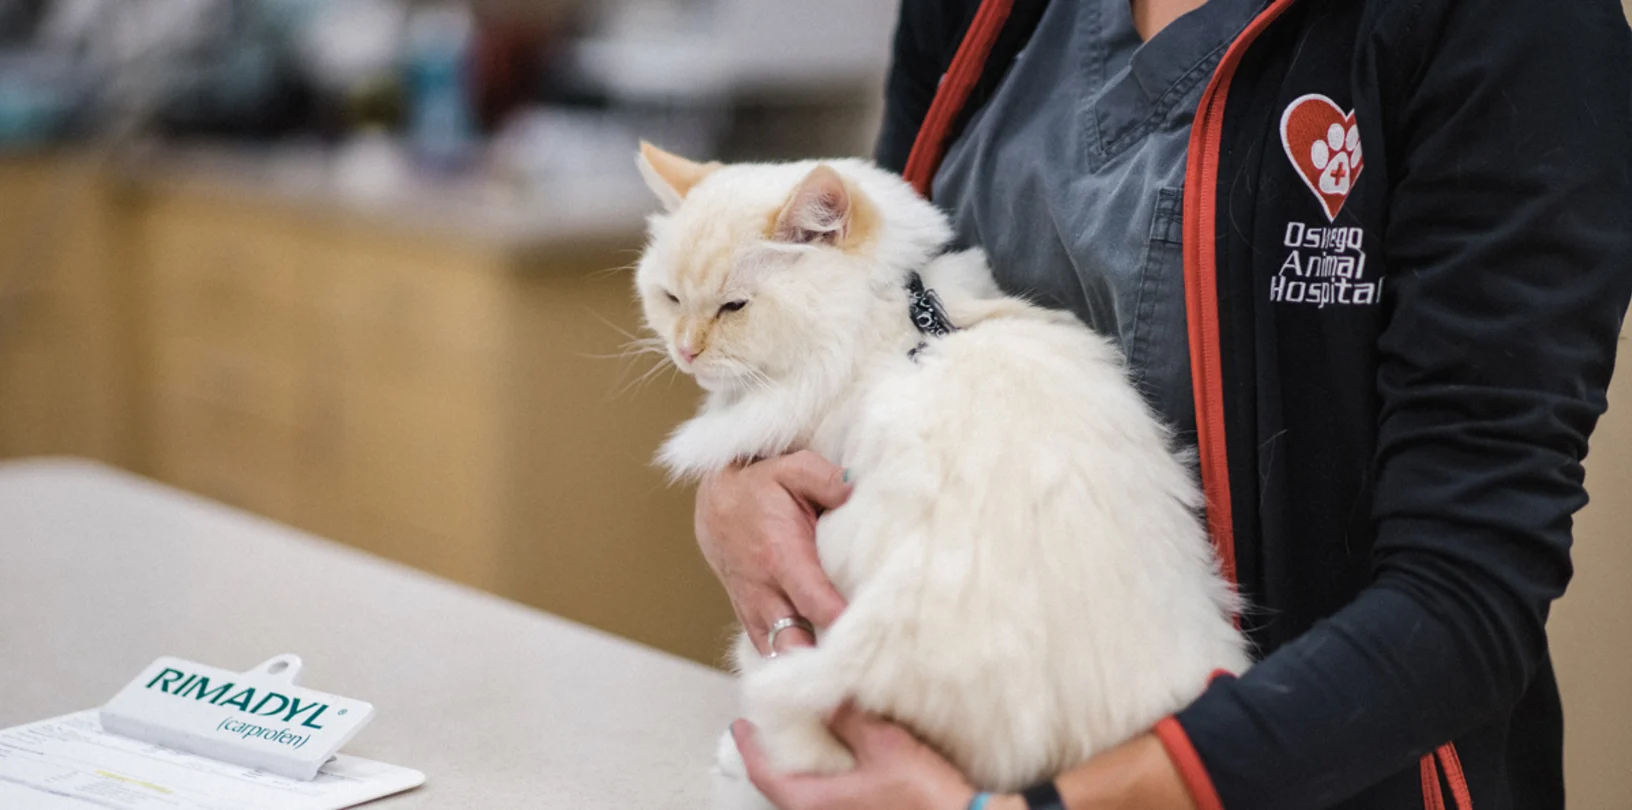 White cat on an office counter, being held in the arms of a veterinarian